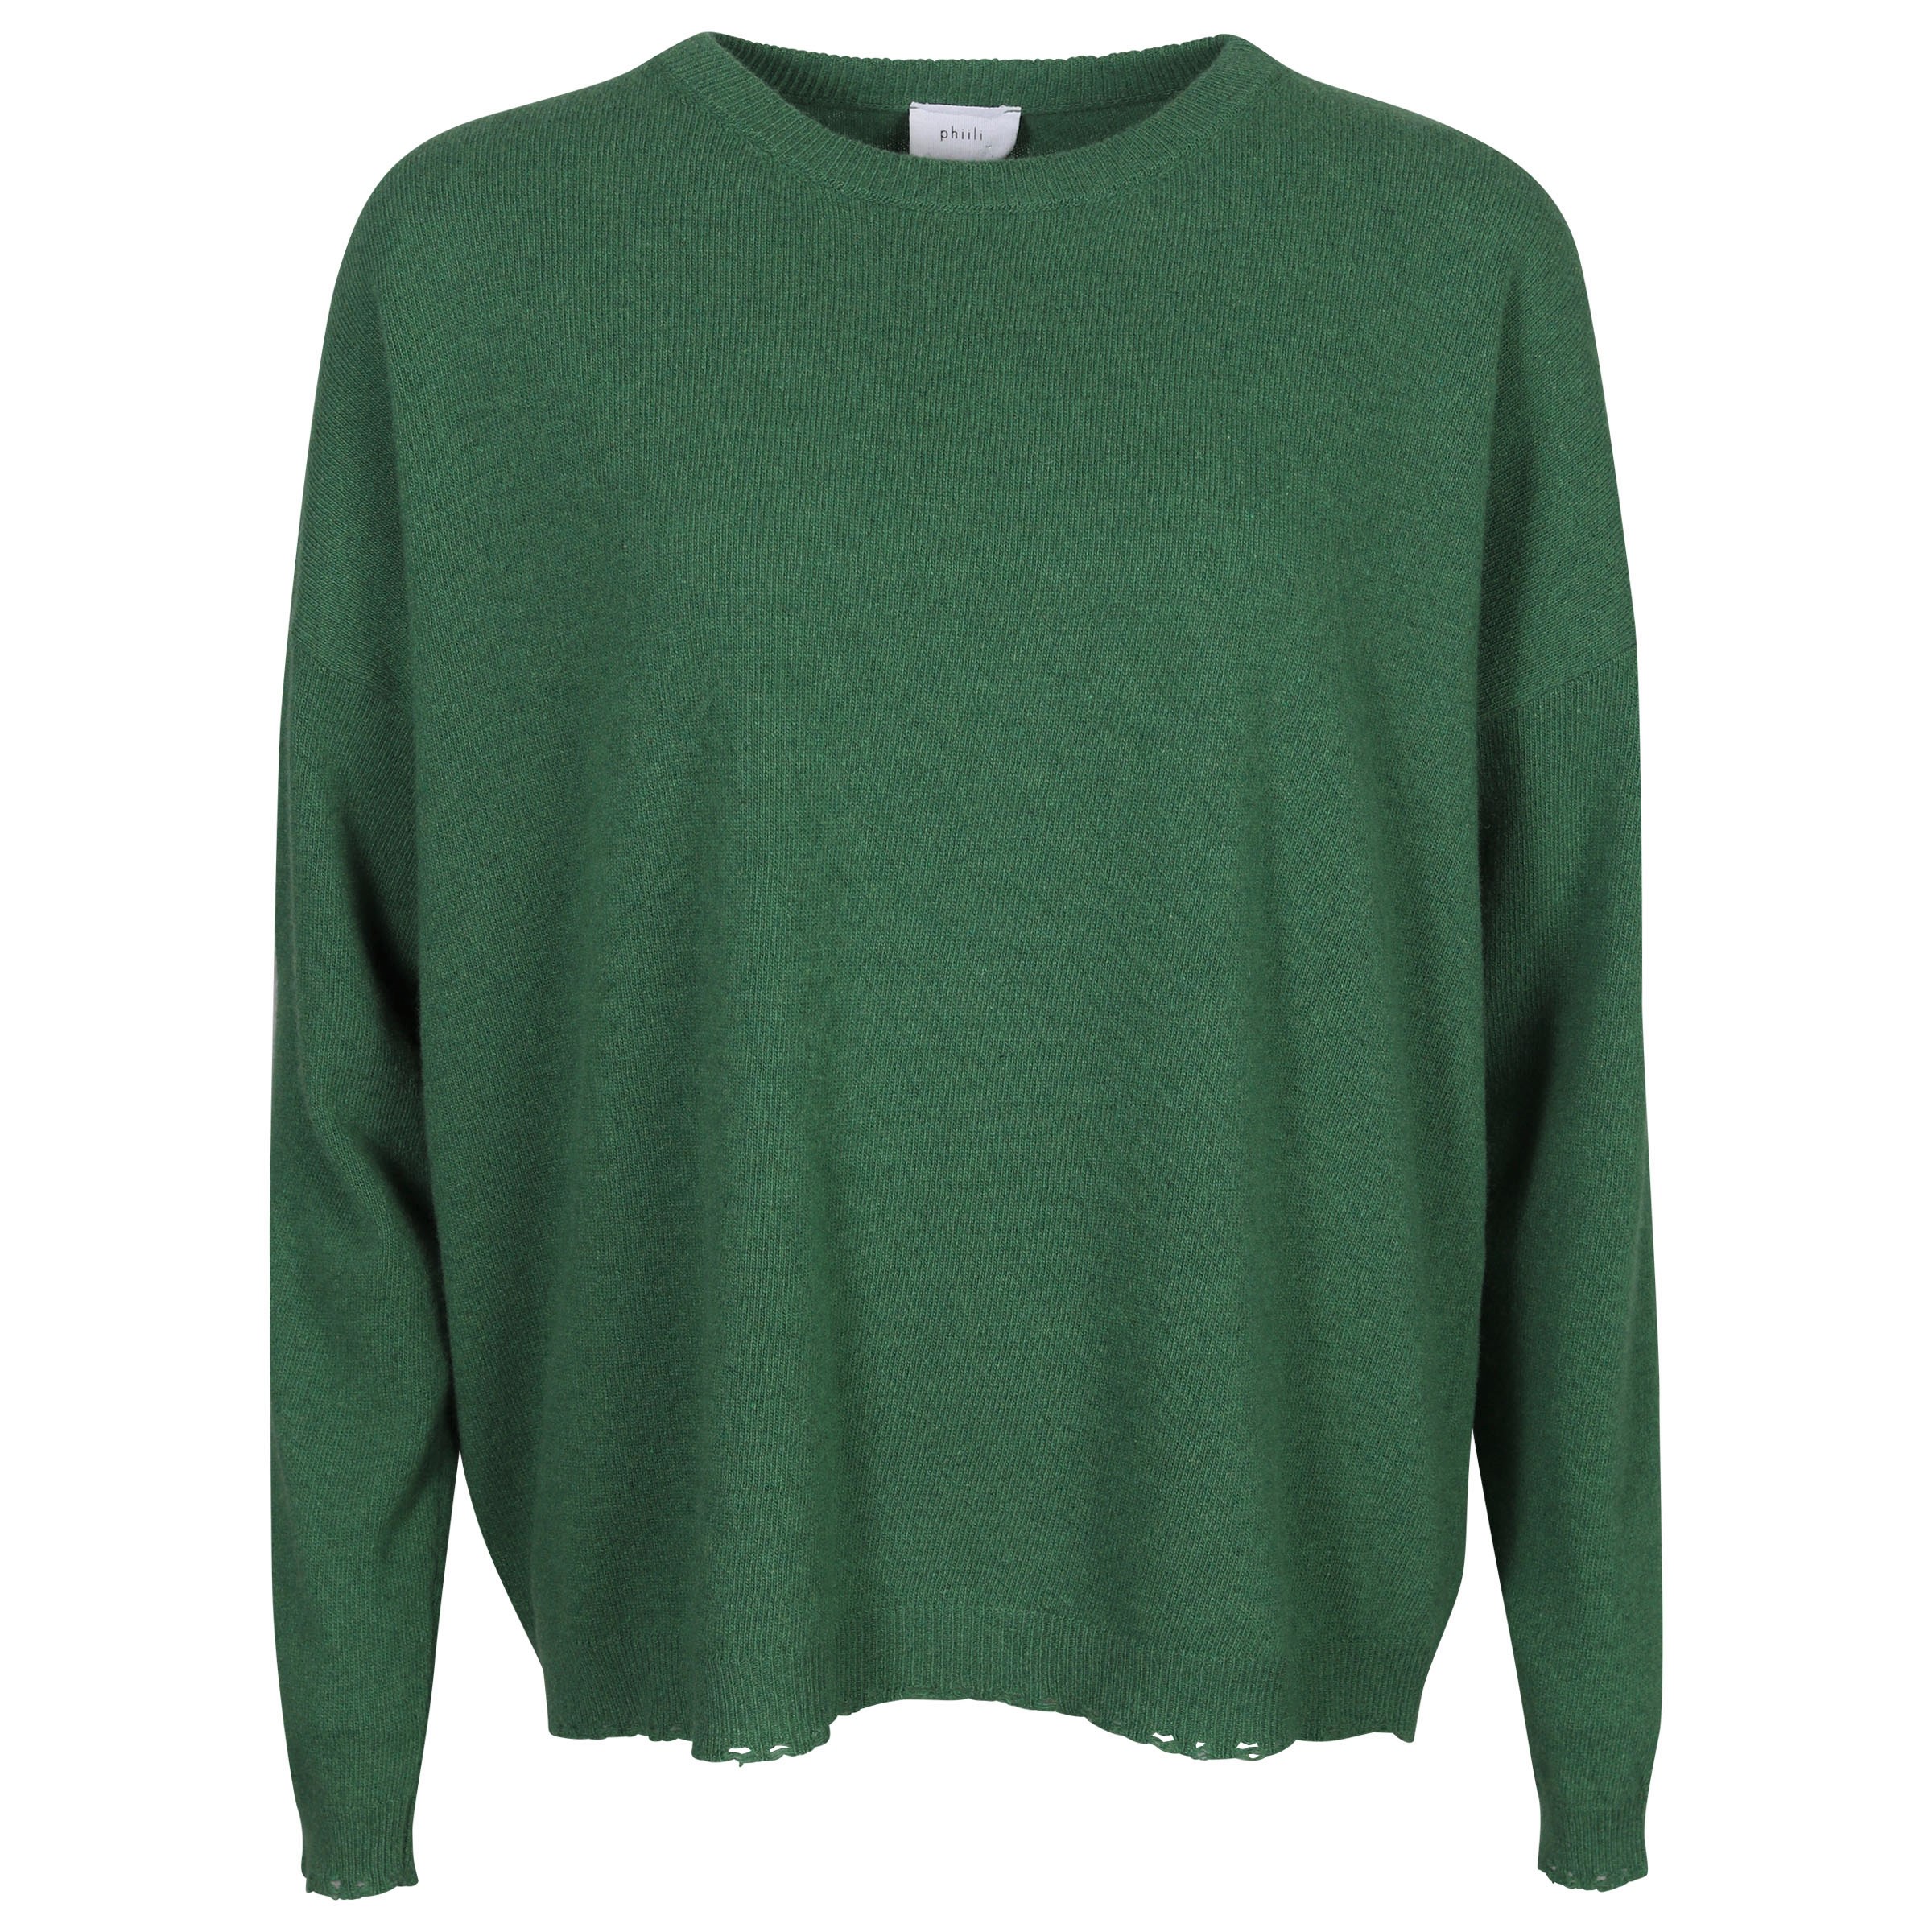 Phiili Recycled Cashmere Sweater in Green XS/S